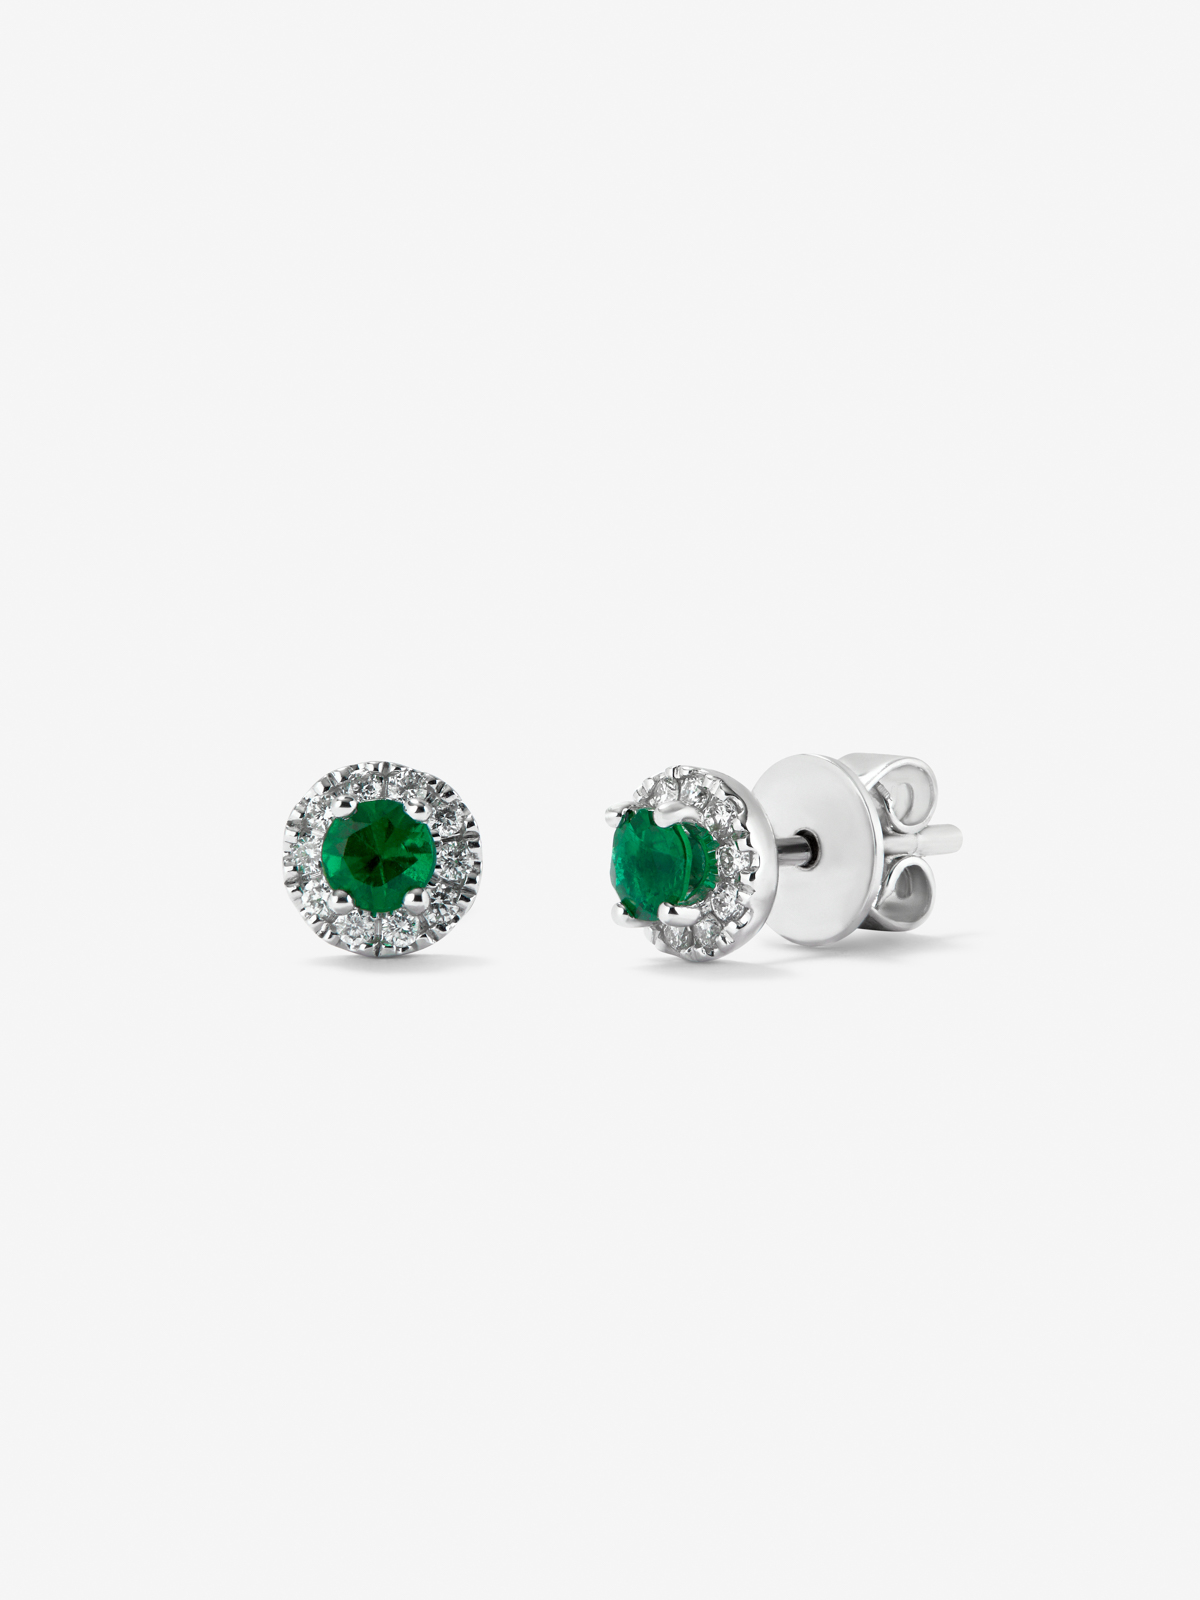 18K white gold earrings with 0.4 ct brilliant-cut green emeralds and 0.16 ct brilliant-cut diamonds